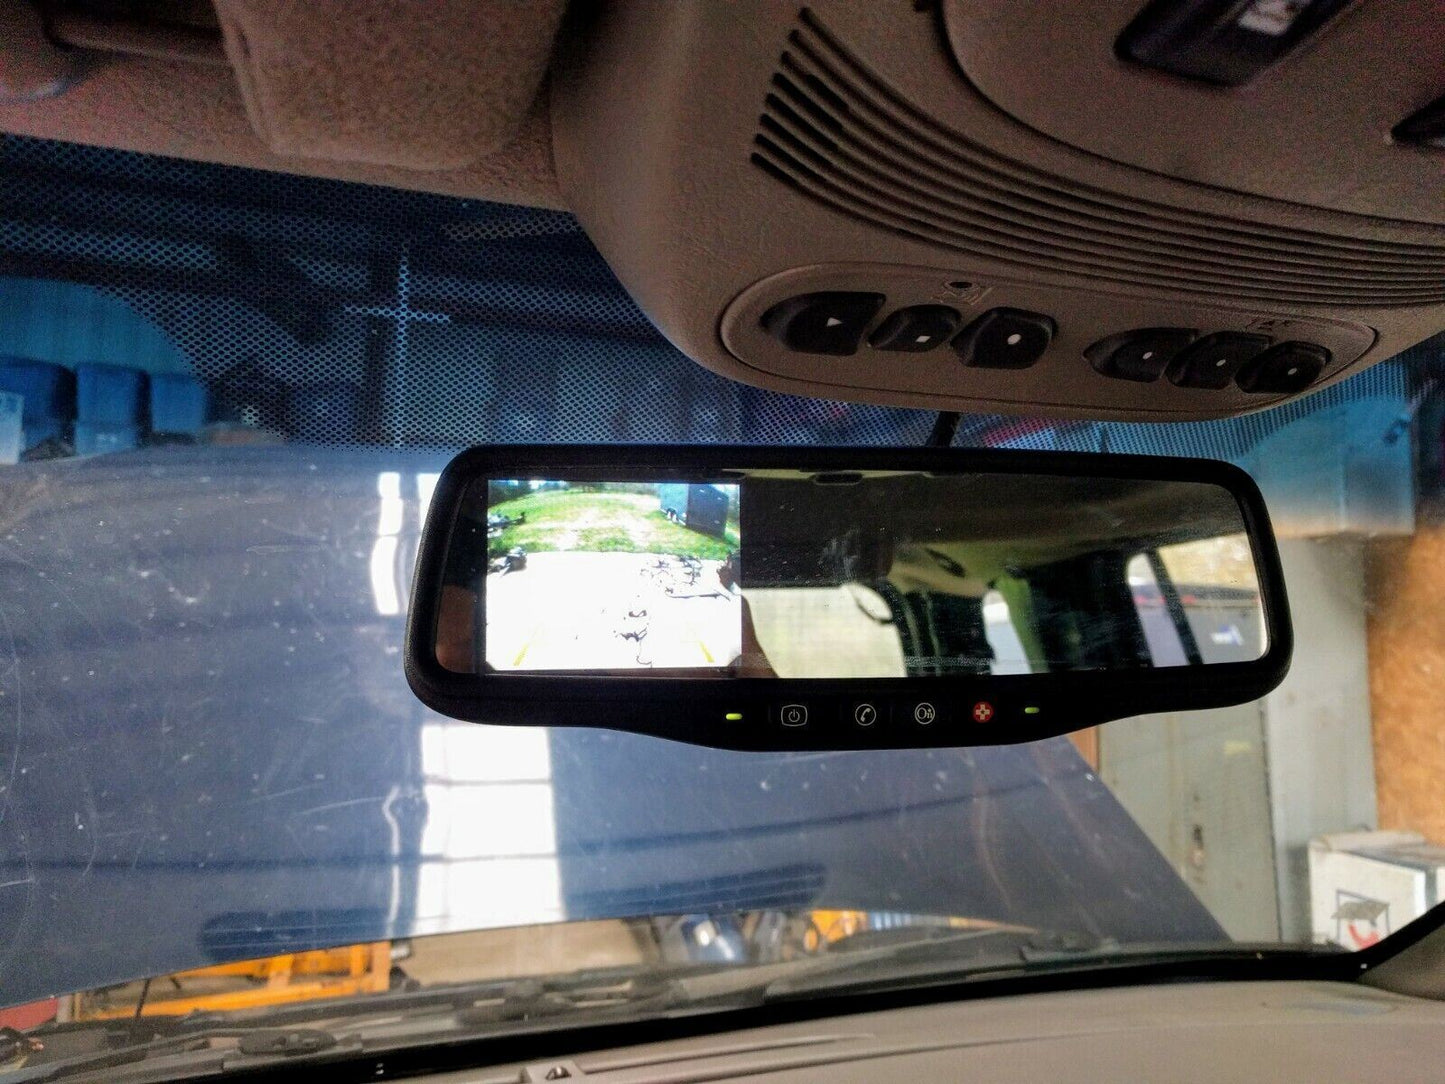 Rear View Camera Video in Mirror TESTED working 25794381 for Enclave Escalade Equinox Acadia Tahoe